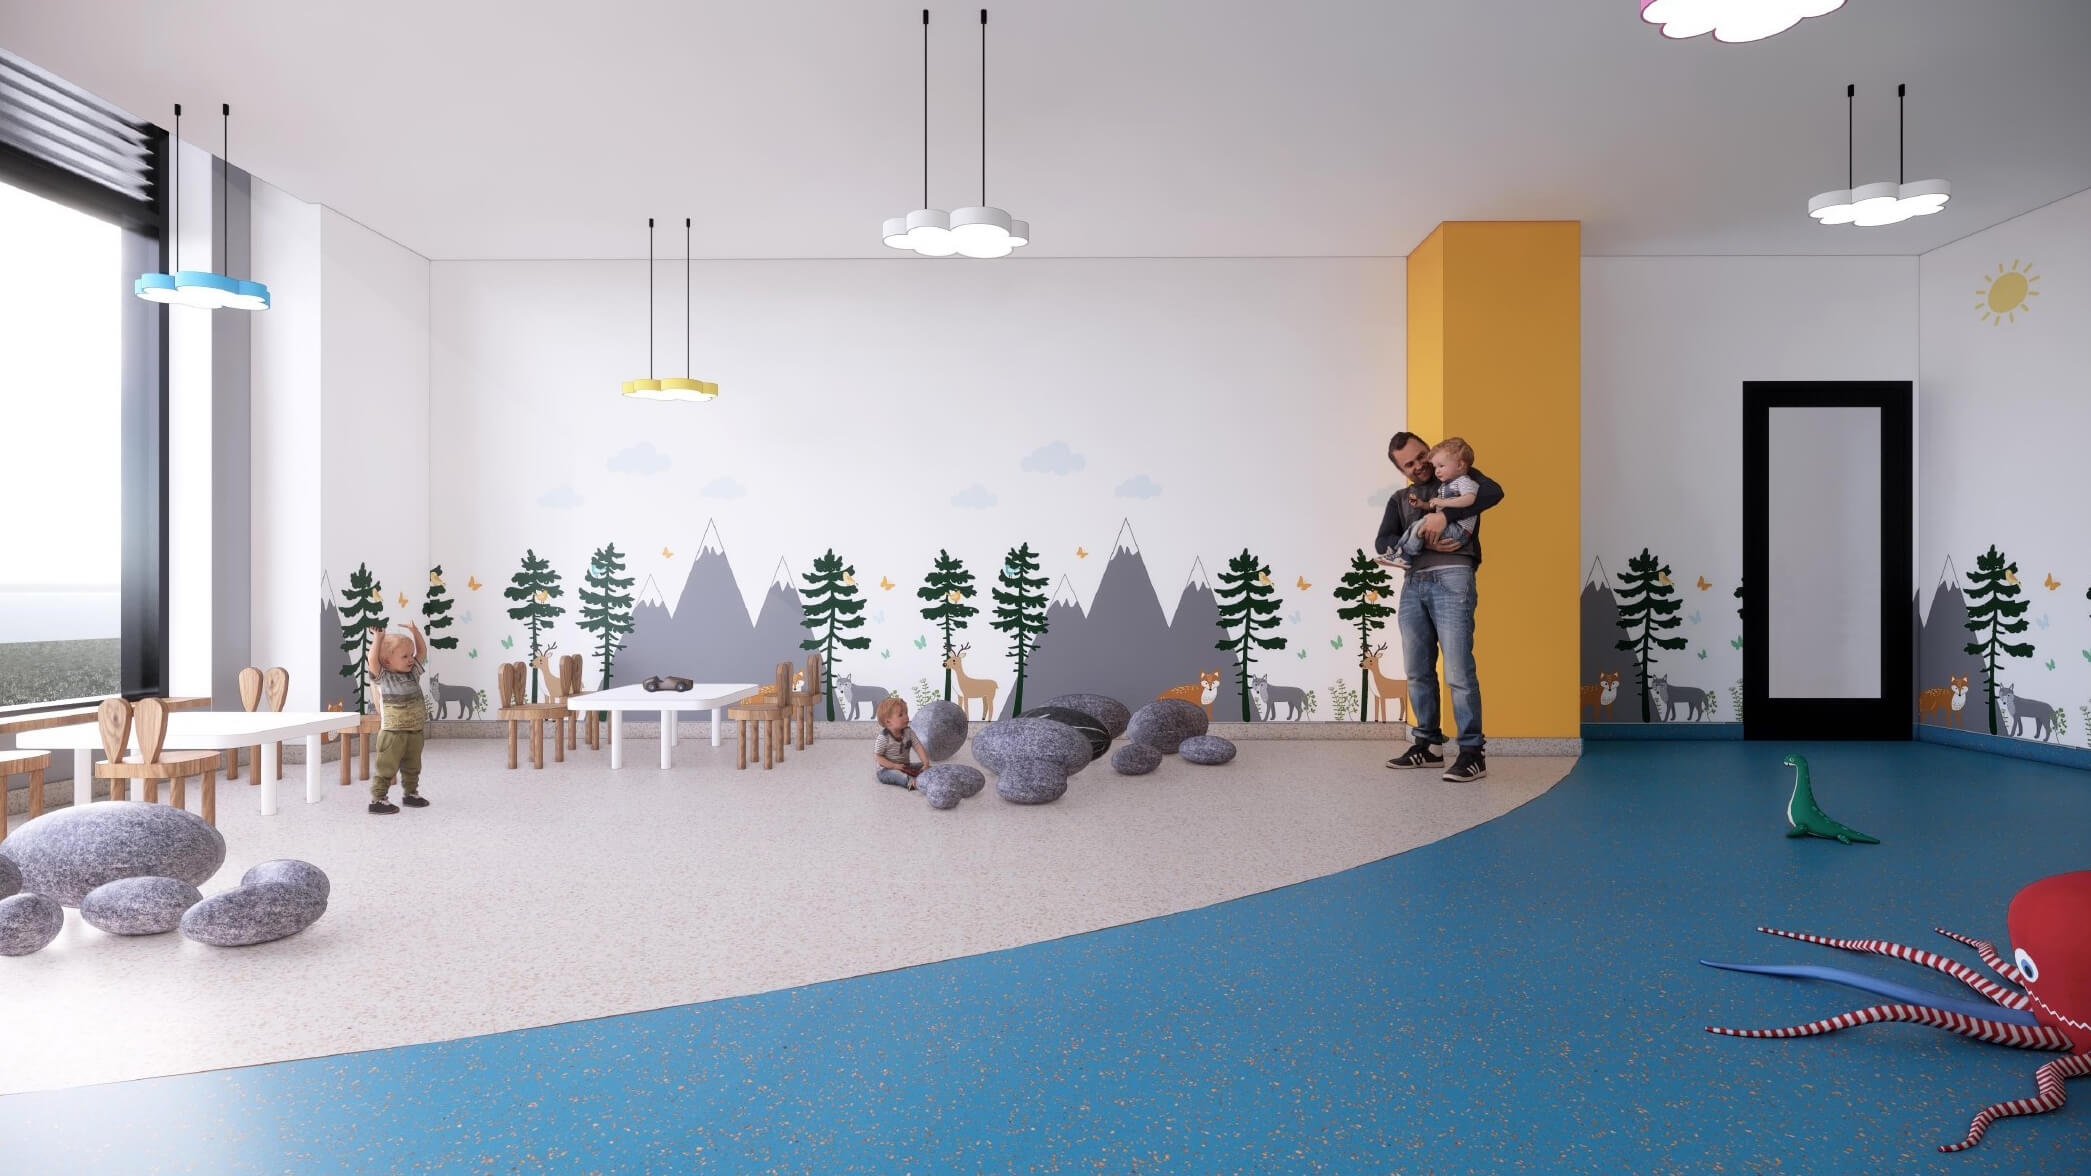 children's play room with mountain and tree mural on the wall